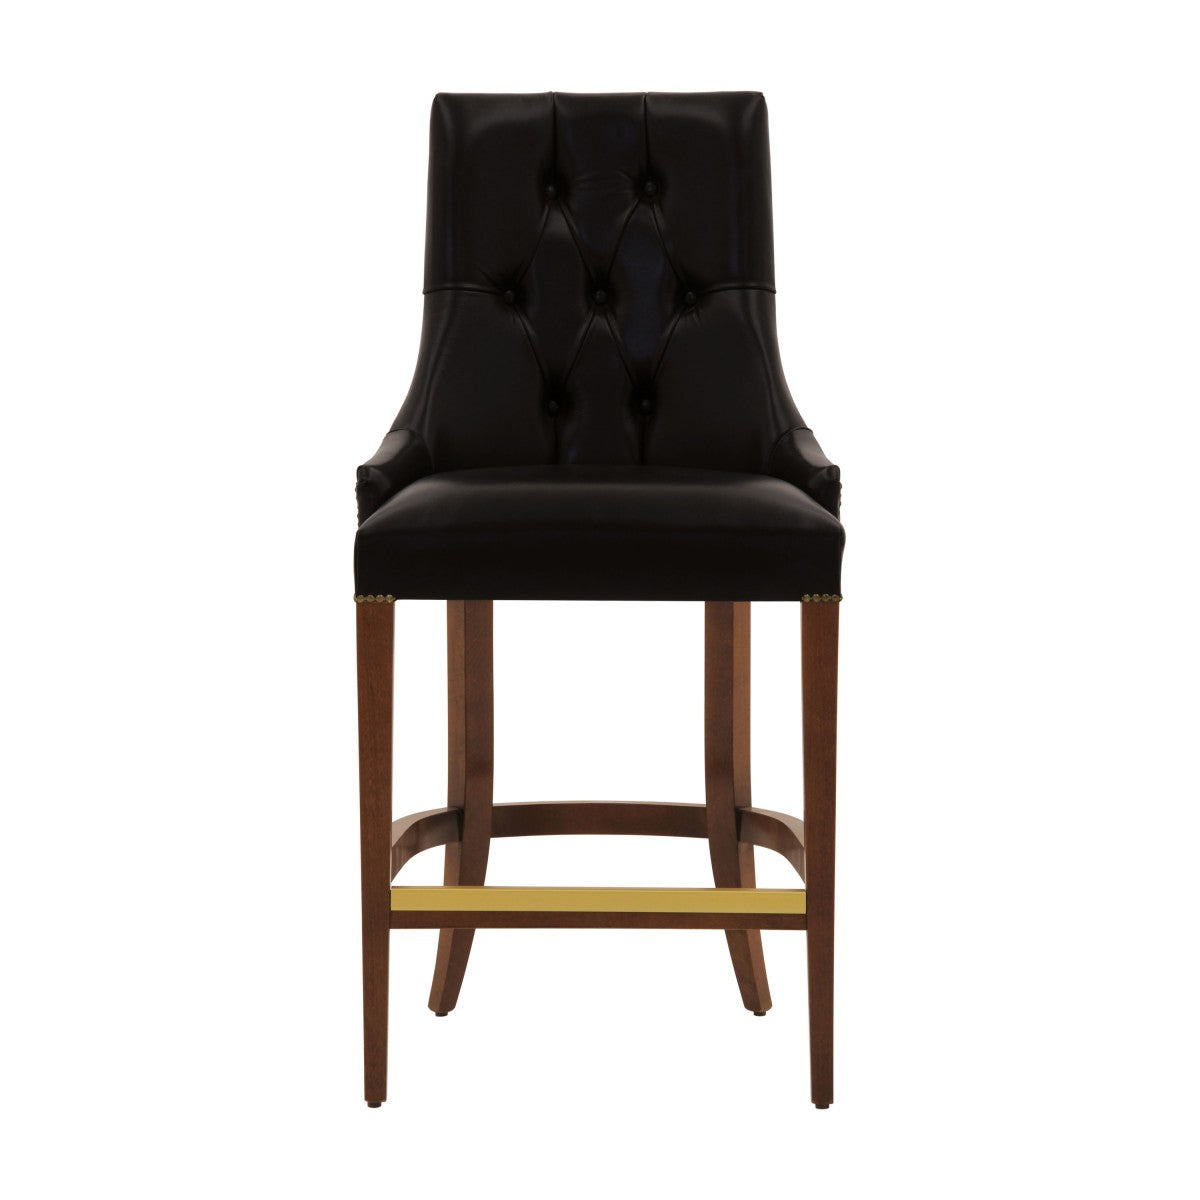 Olympia Bespoke Upholstered Contemporary Kitchen Counter Barstool MS410C Custom Made To Order